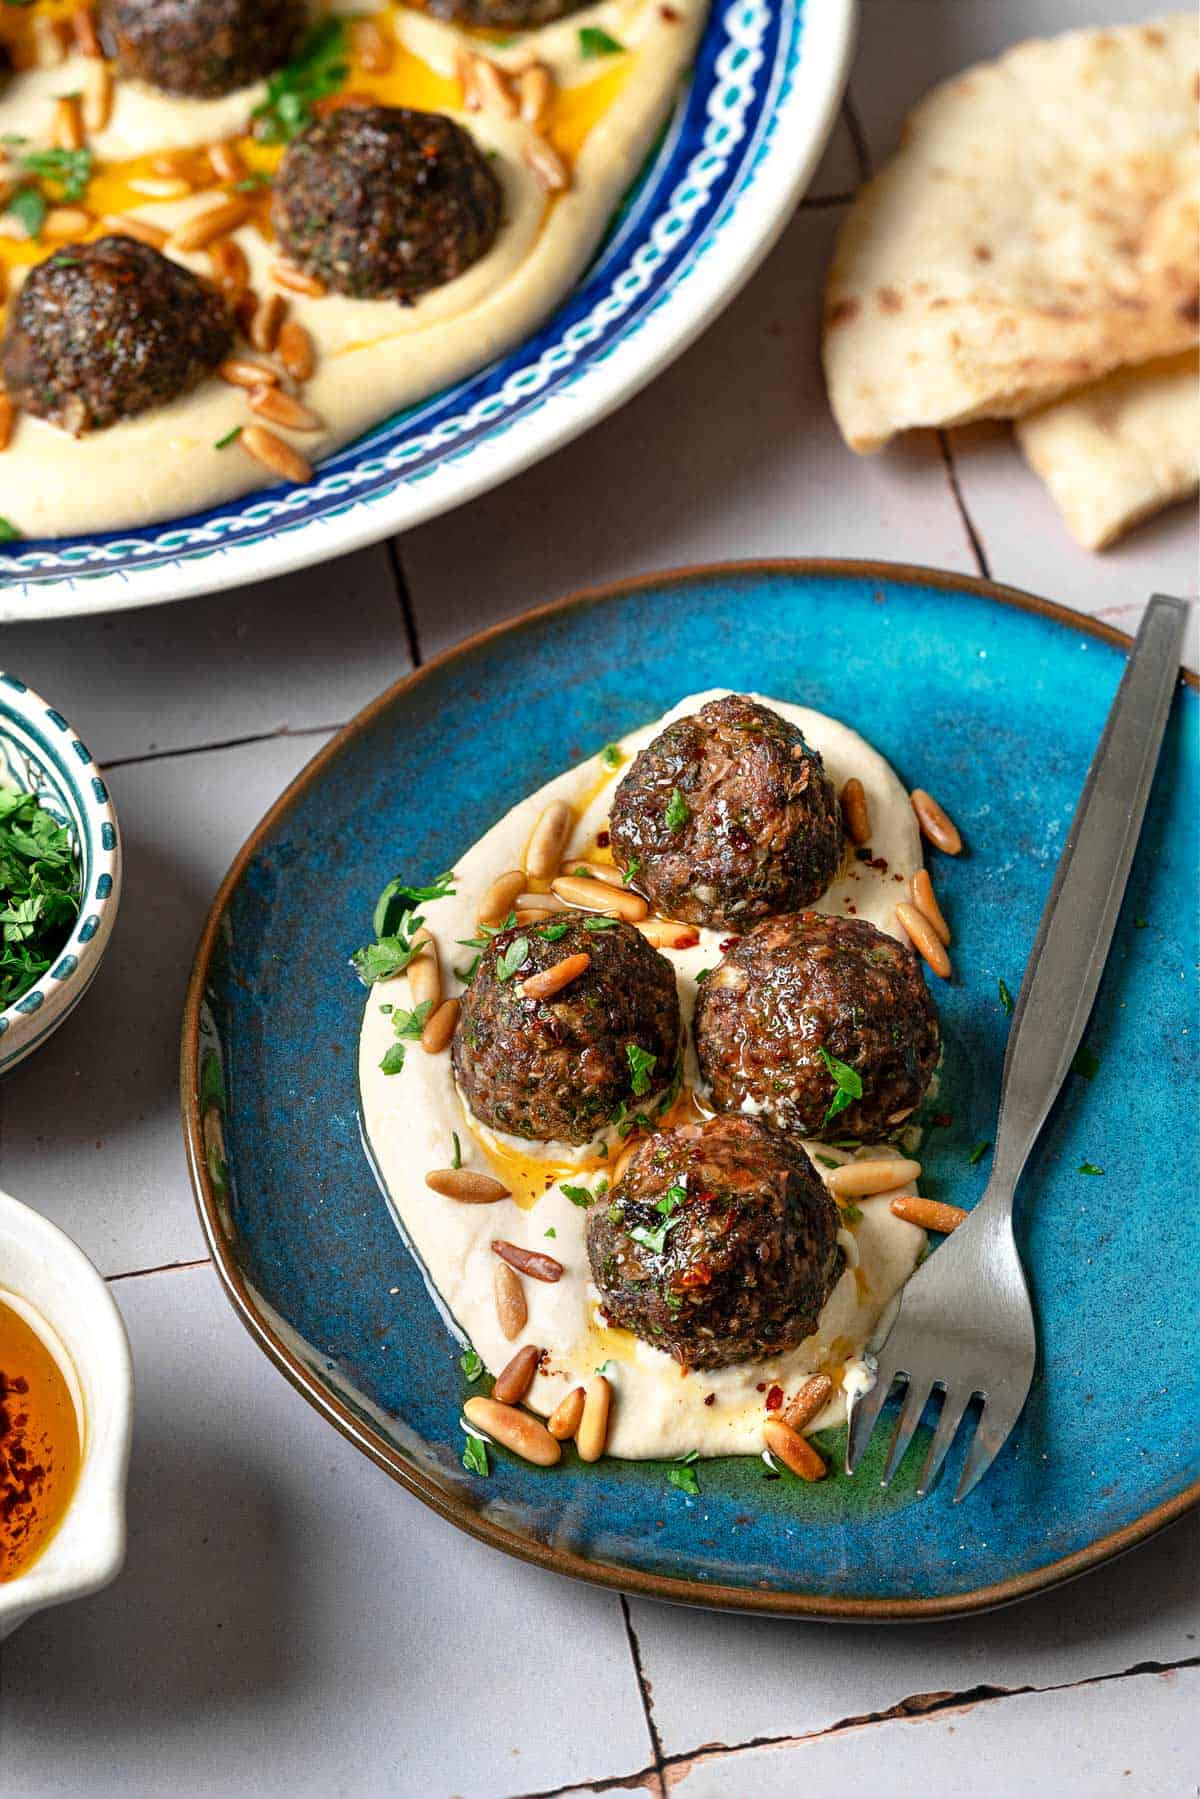 a close up of a serving of meatballs over hummus on a blue plate with a fork.